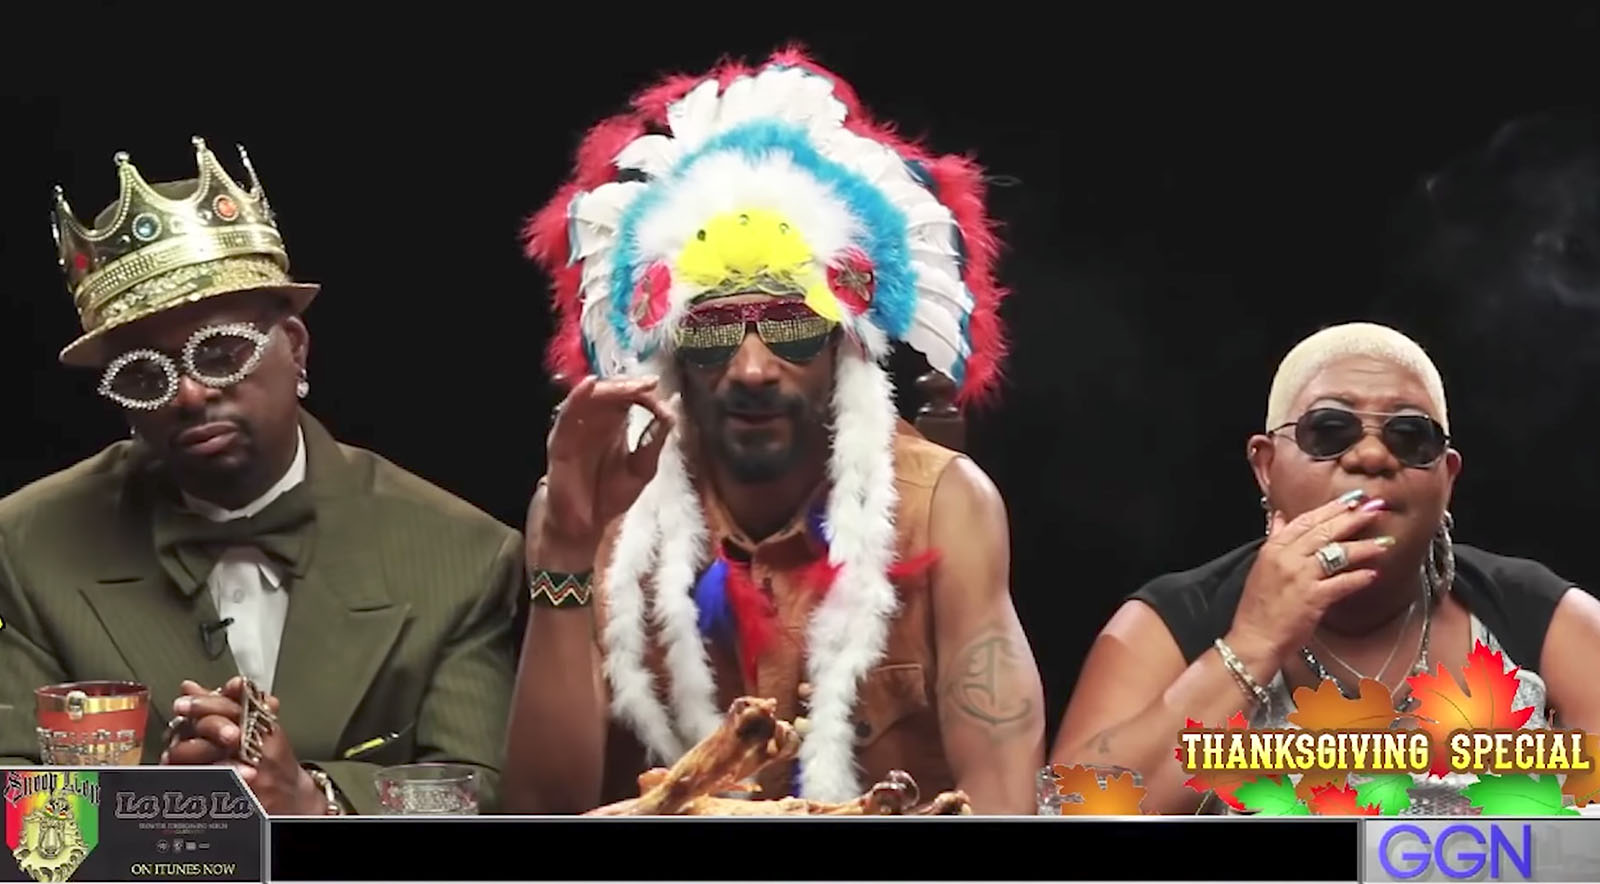 Turkey Day Turn-Up: The Very Best of Snoop and Friends’ GGN Thanksgiving